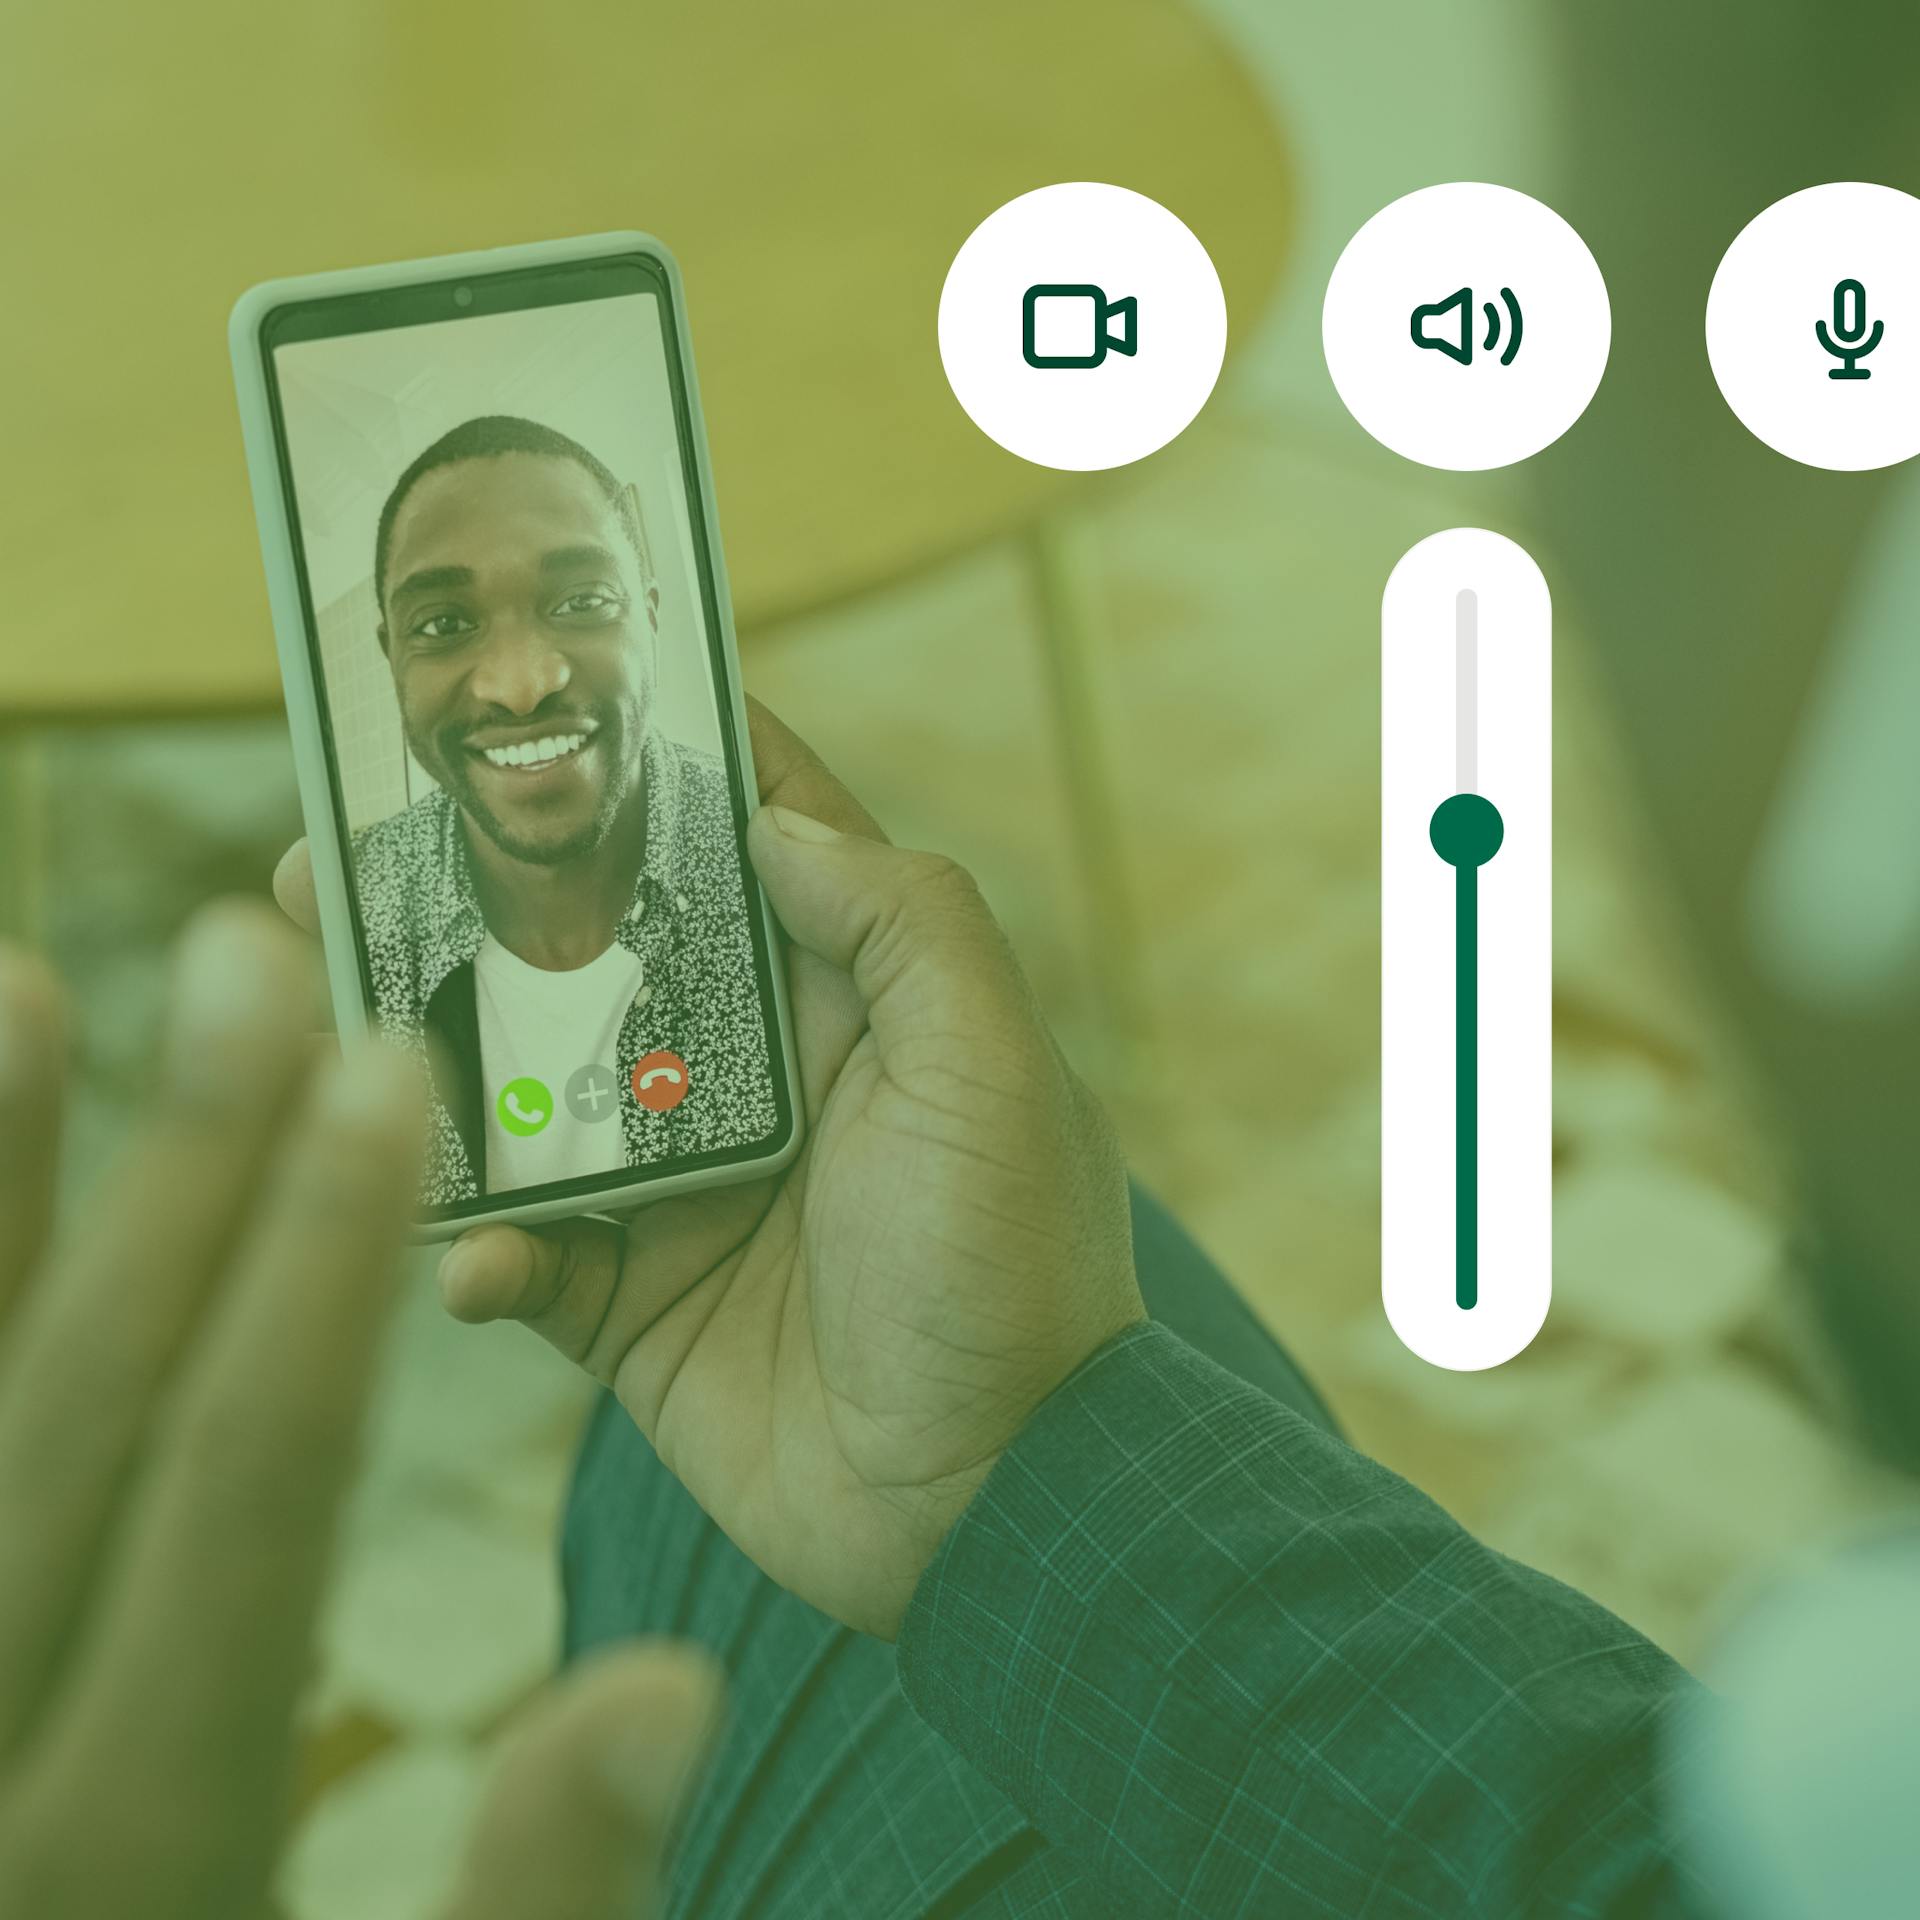 Smartphone showing a video call with a smiling man